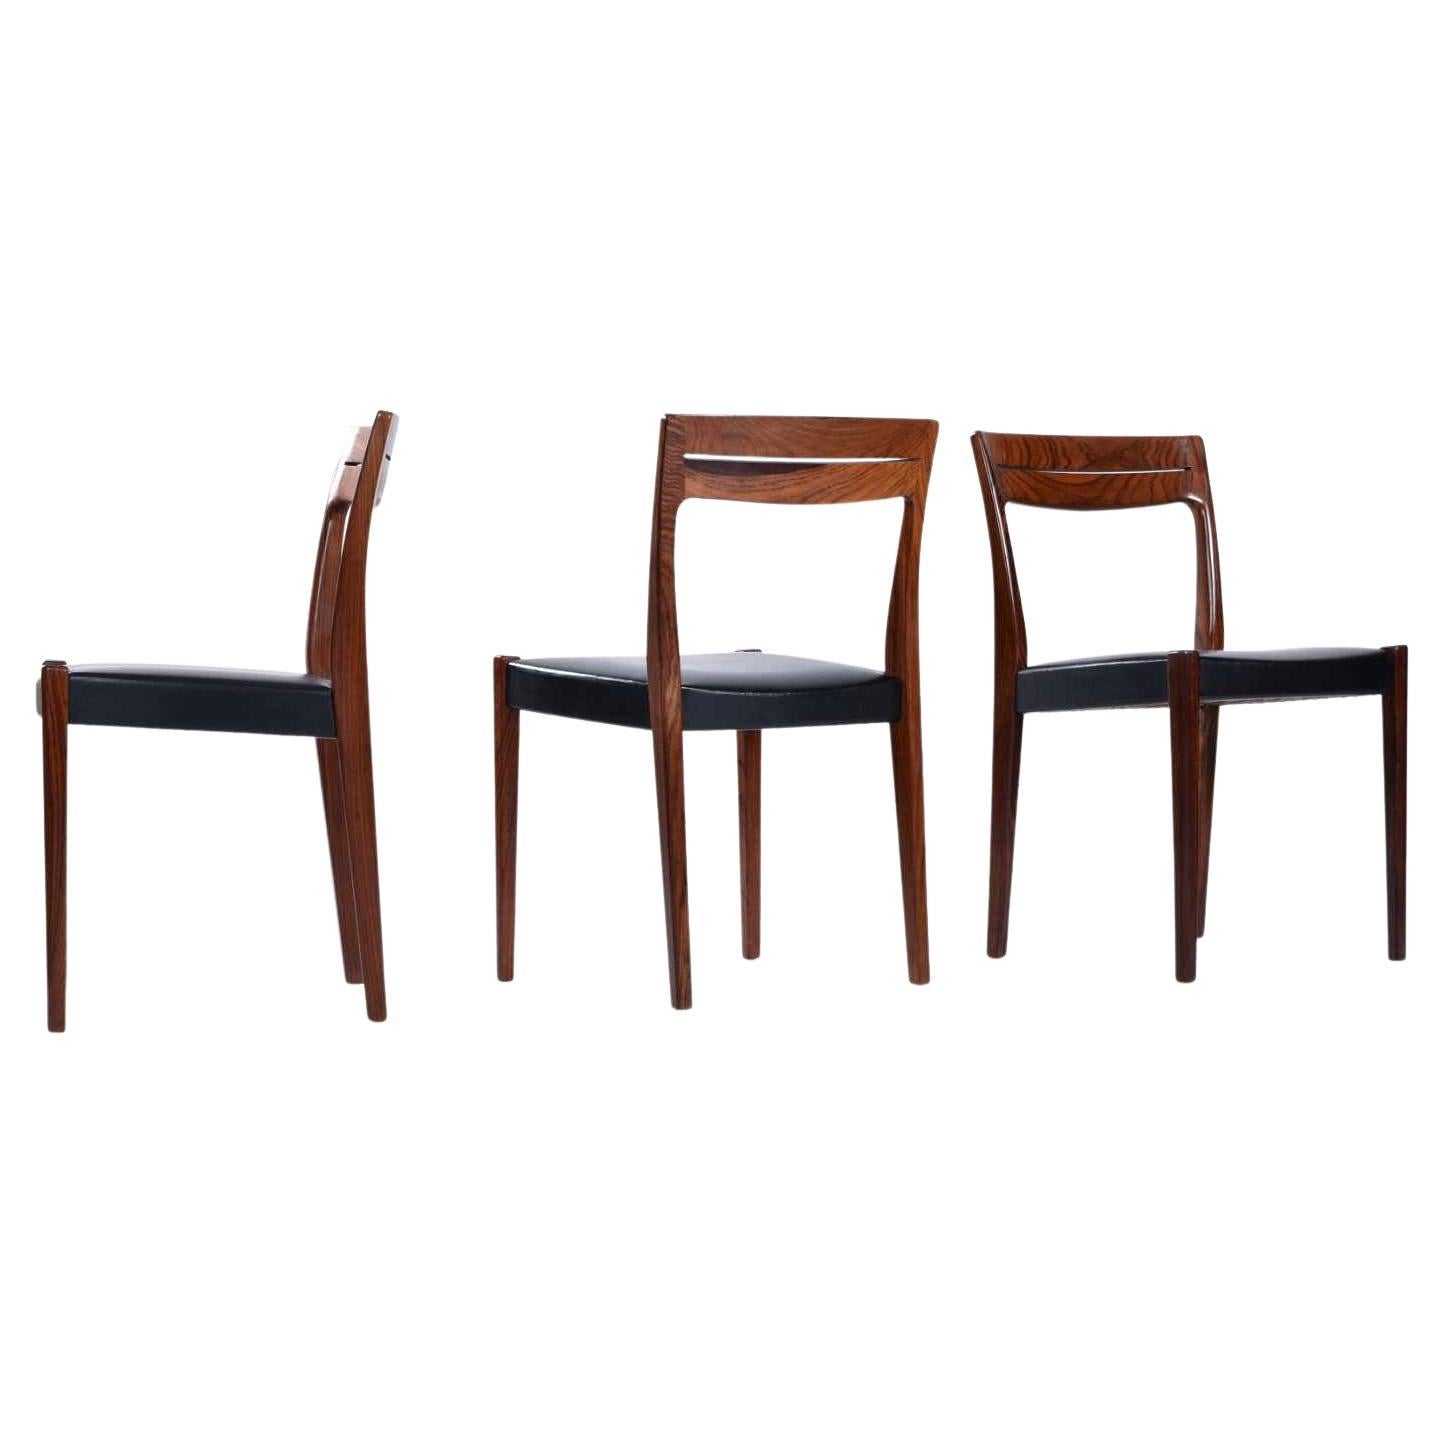 Mid-20th Century Svegards Markaryd Rosewood Dining Chairs Made in Sweden Set of 8